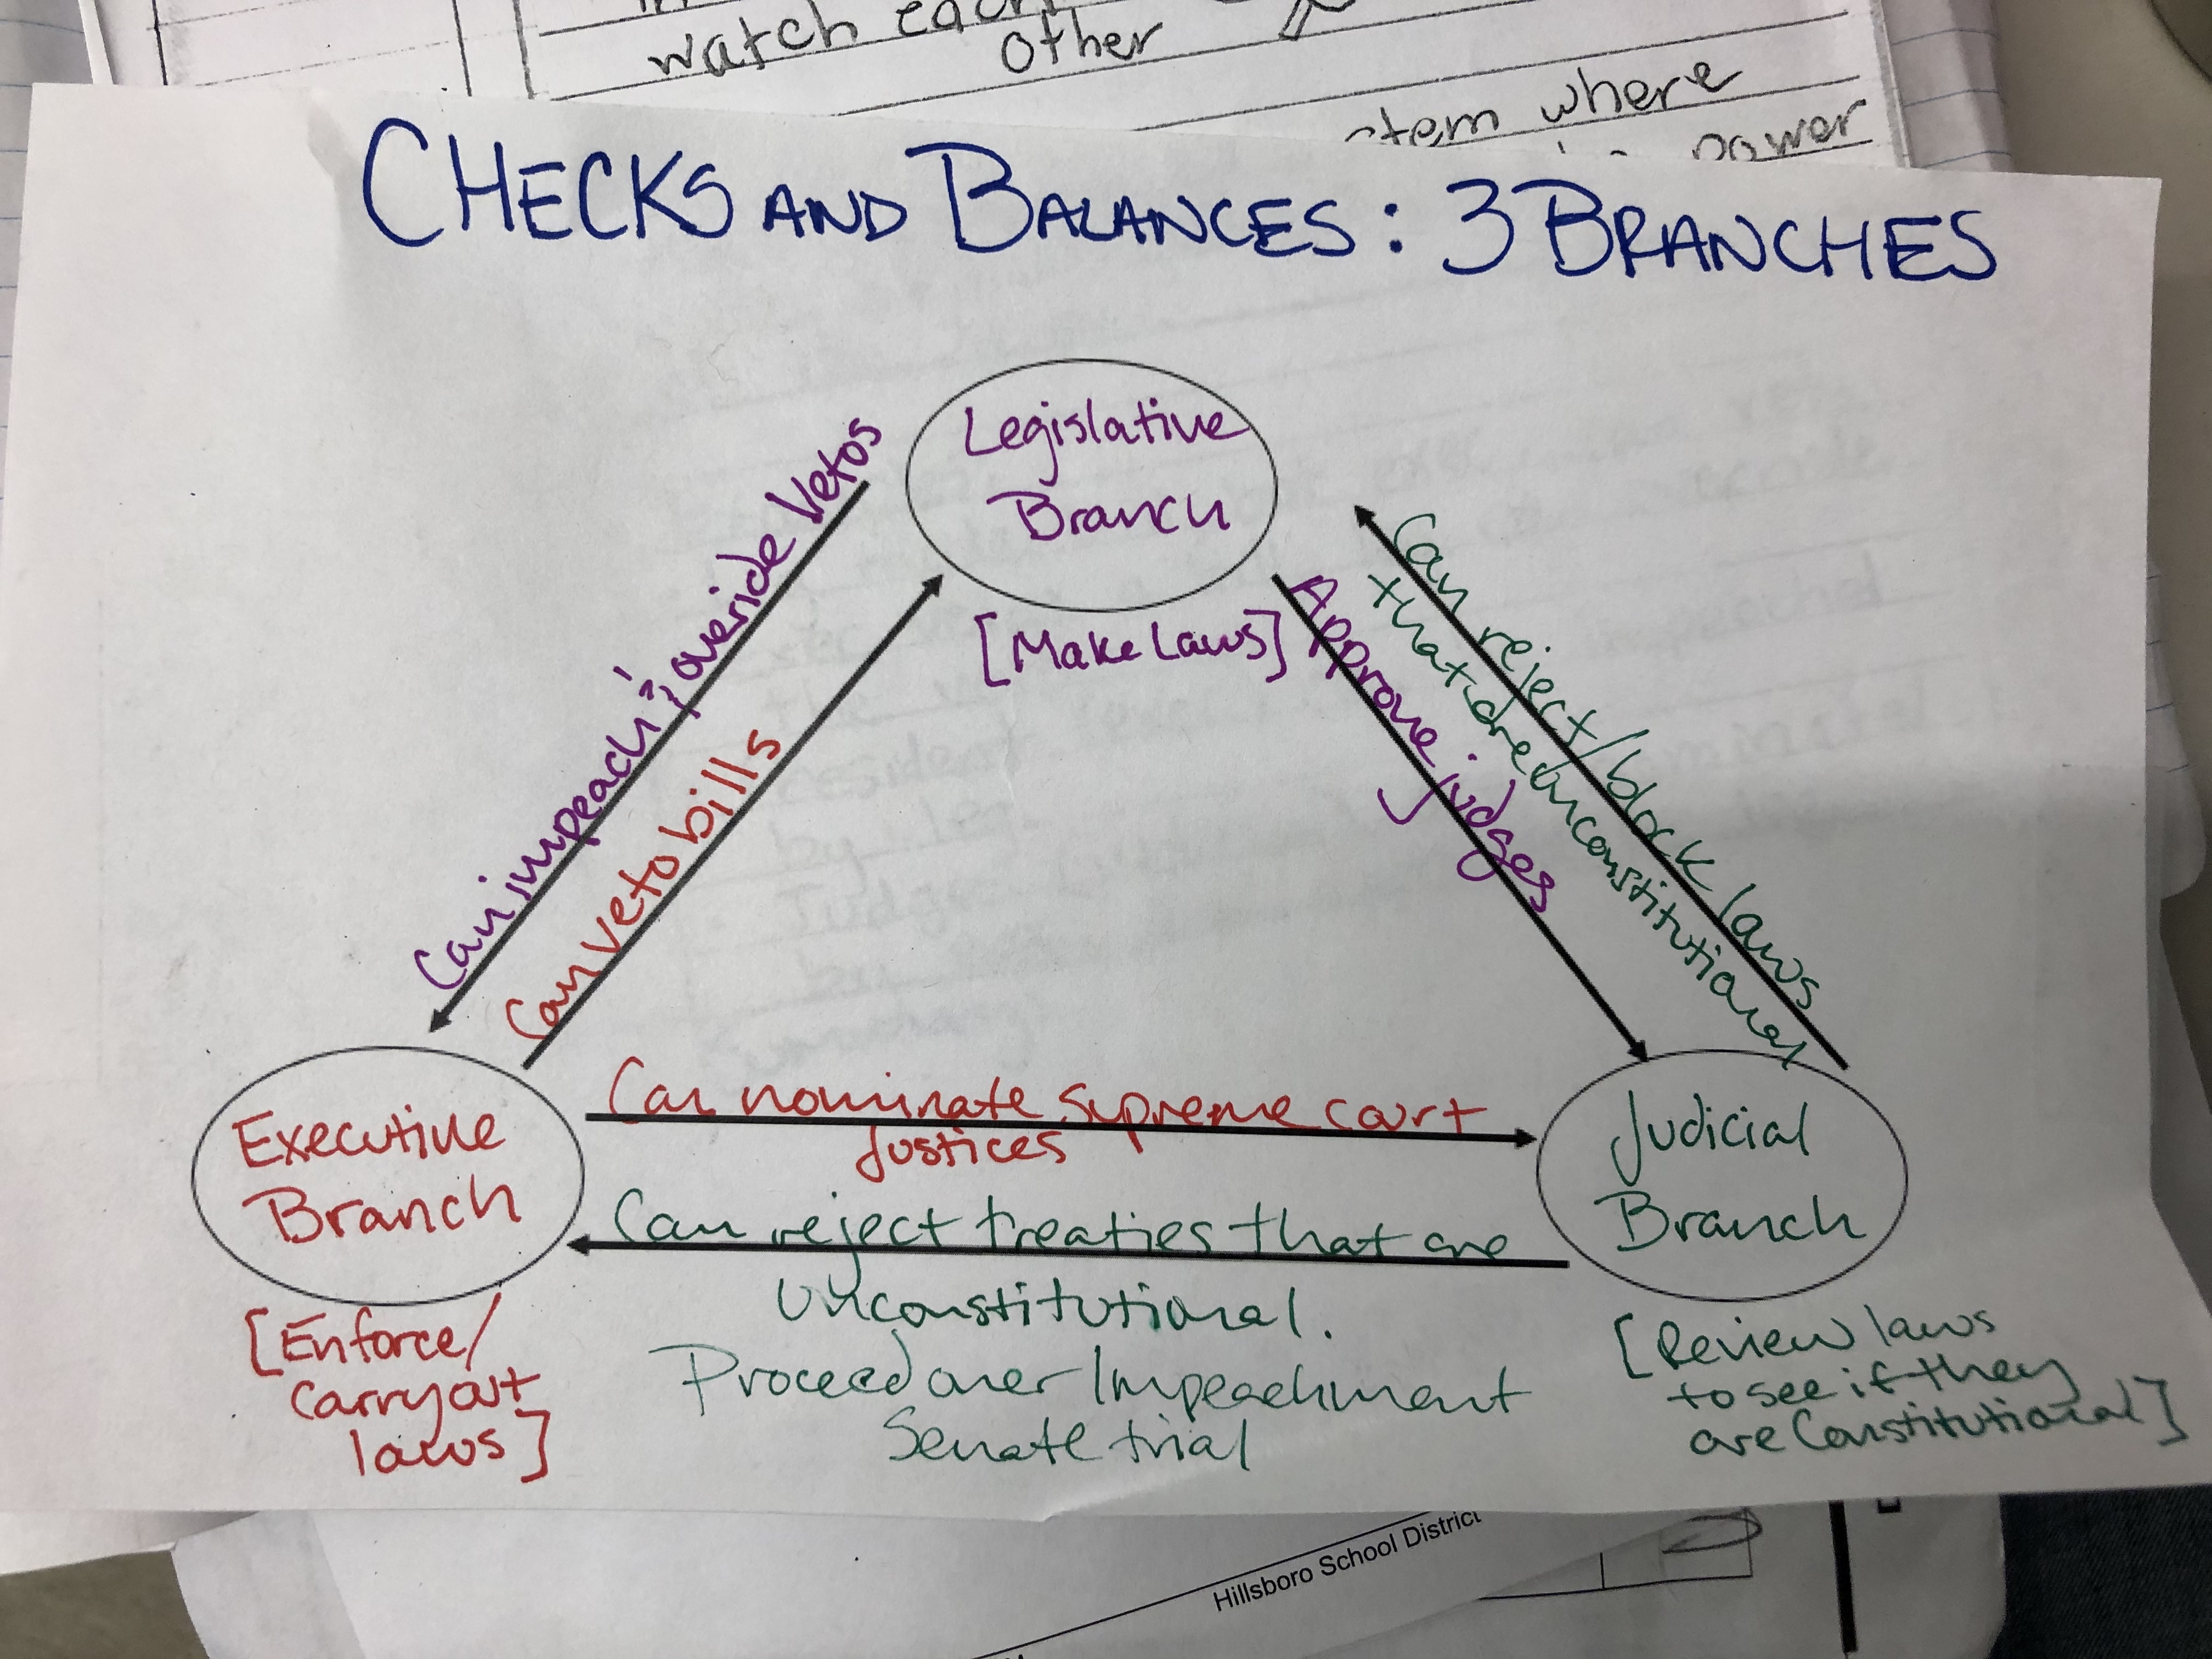 20th Grade Social Studies With Checks And Balances Worksheet Answers